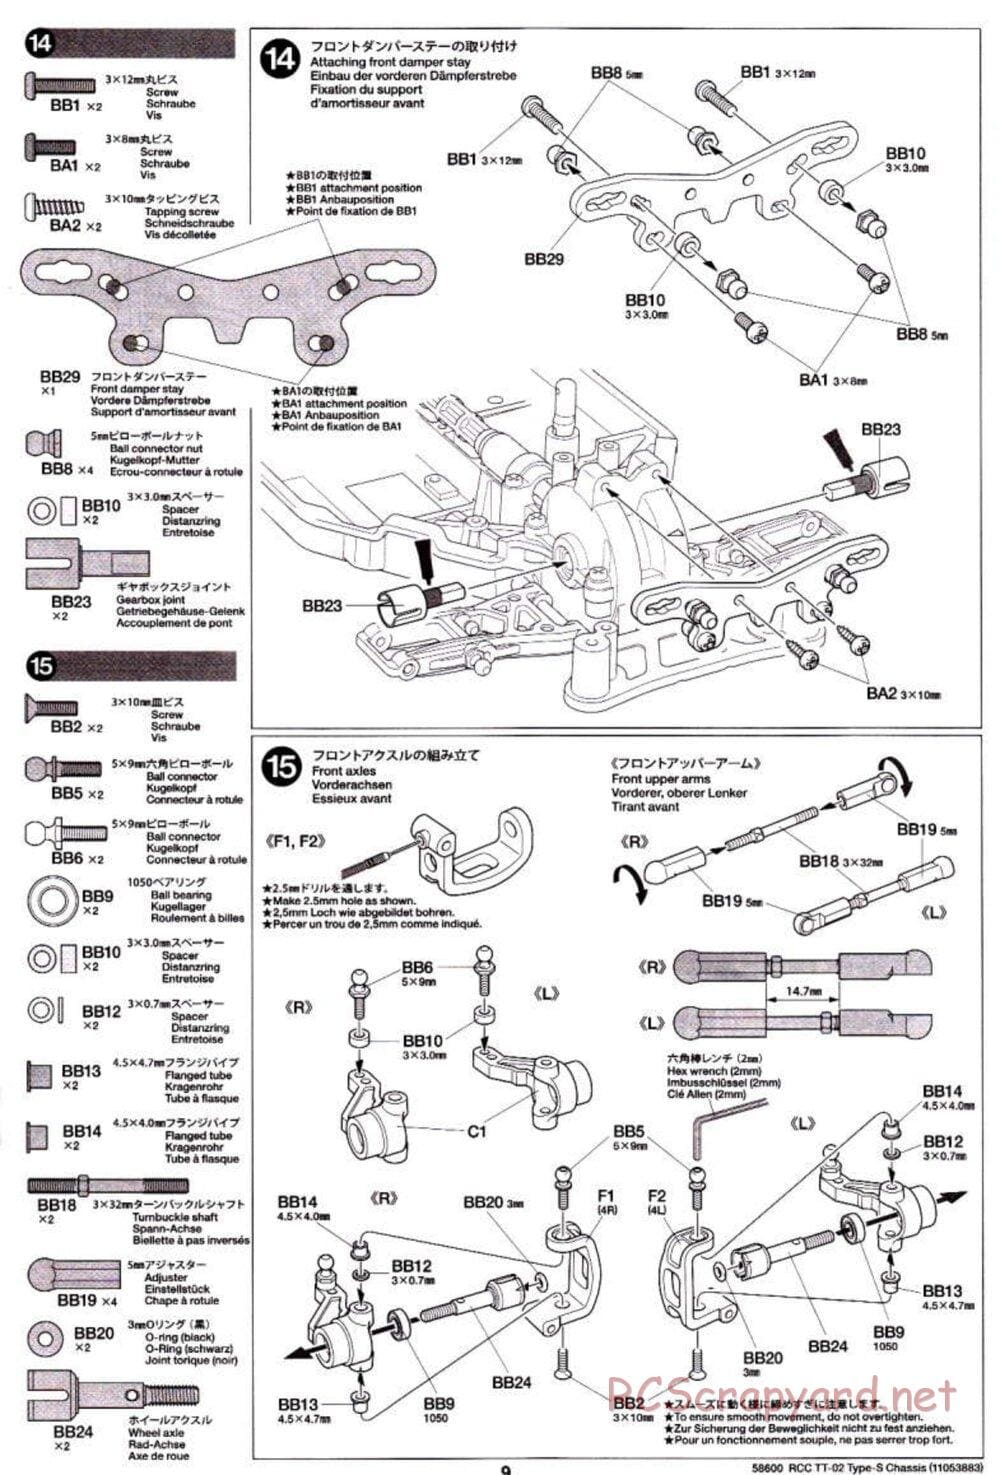 Tamiya - TT-02 Type-S Chassis - Manual - Page 9